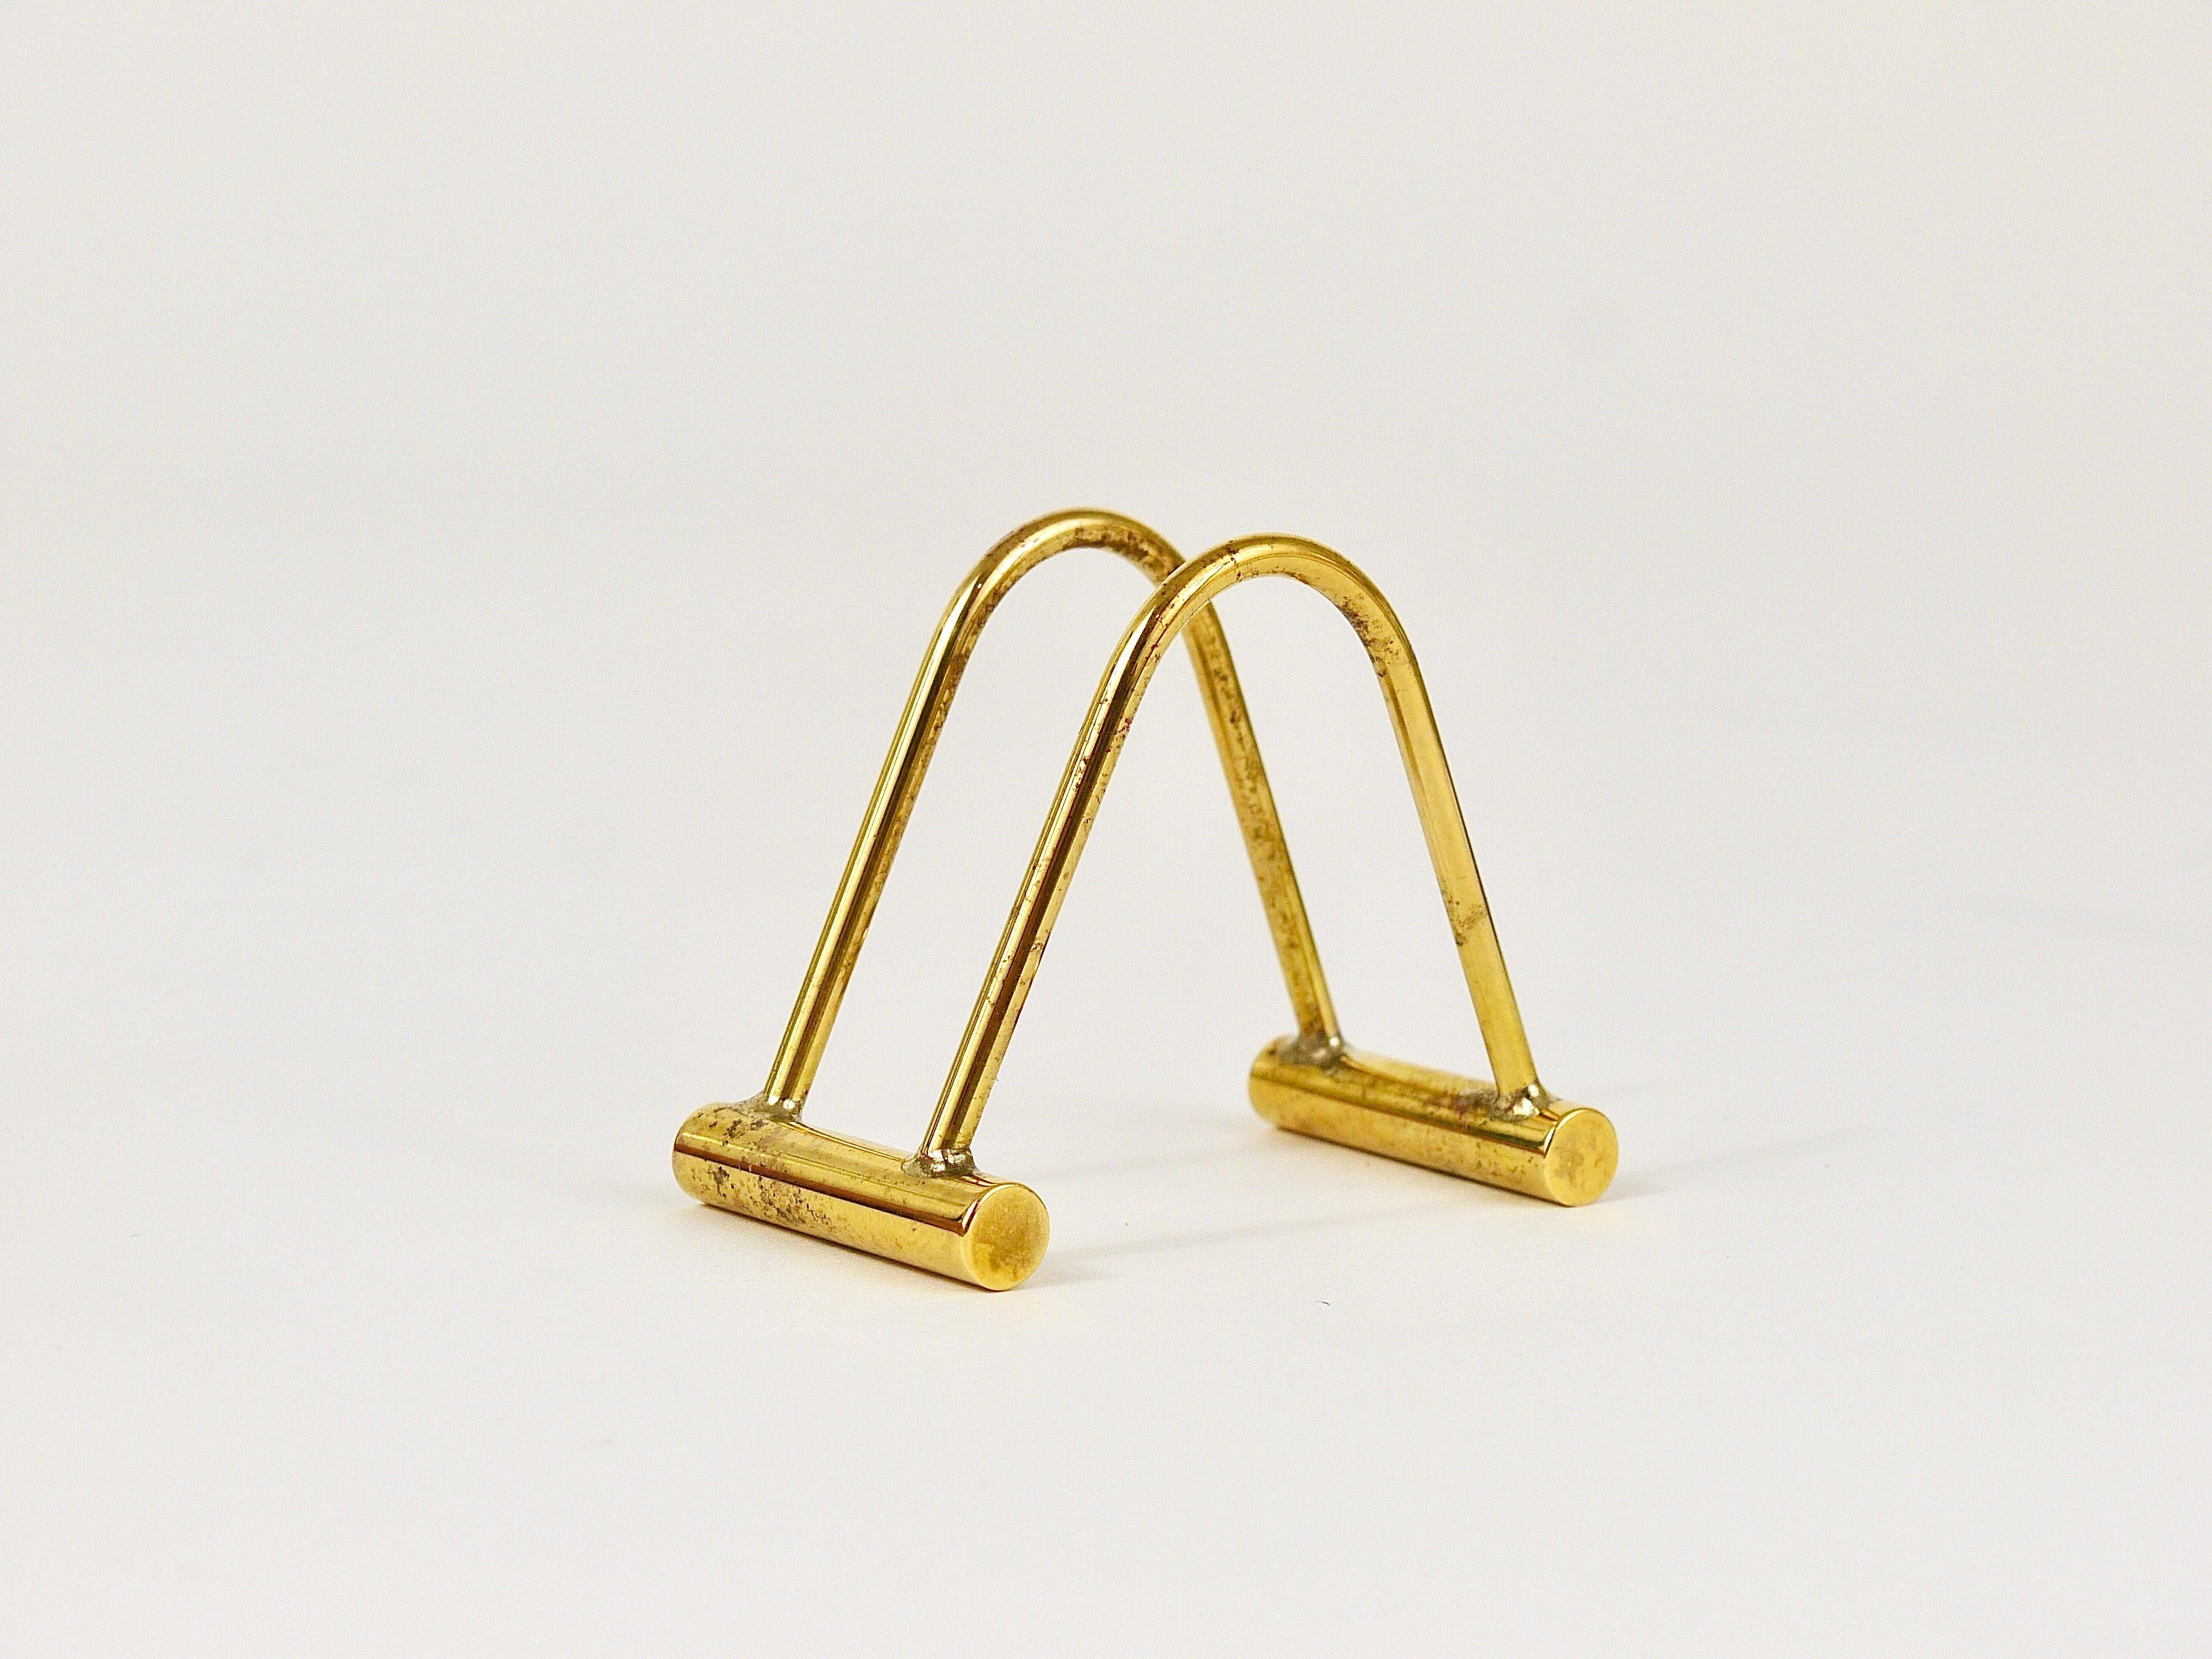 Carl Auböck Up to Three Midcentury Polished Brass Card Holder, Austria, 1950s For Sale 1